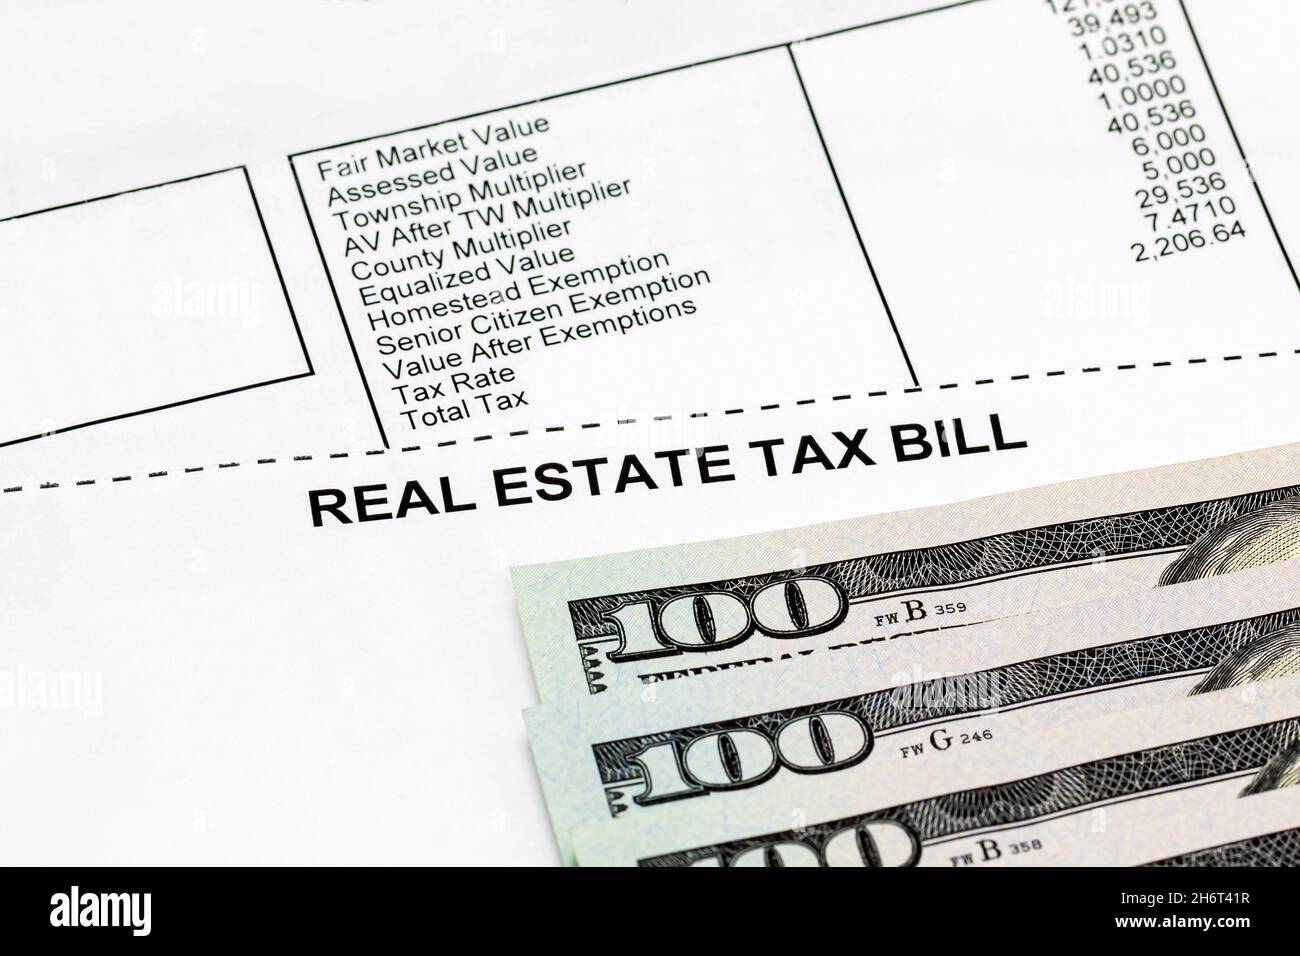 Real estate property tax bill with 100 dollar bills. school funding, taxes, debt, and local government funding concept Stock Photo